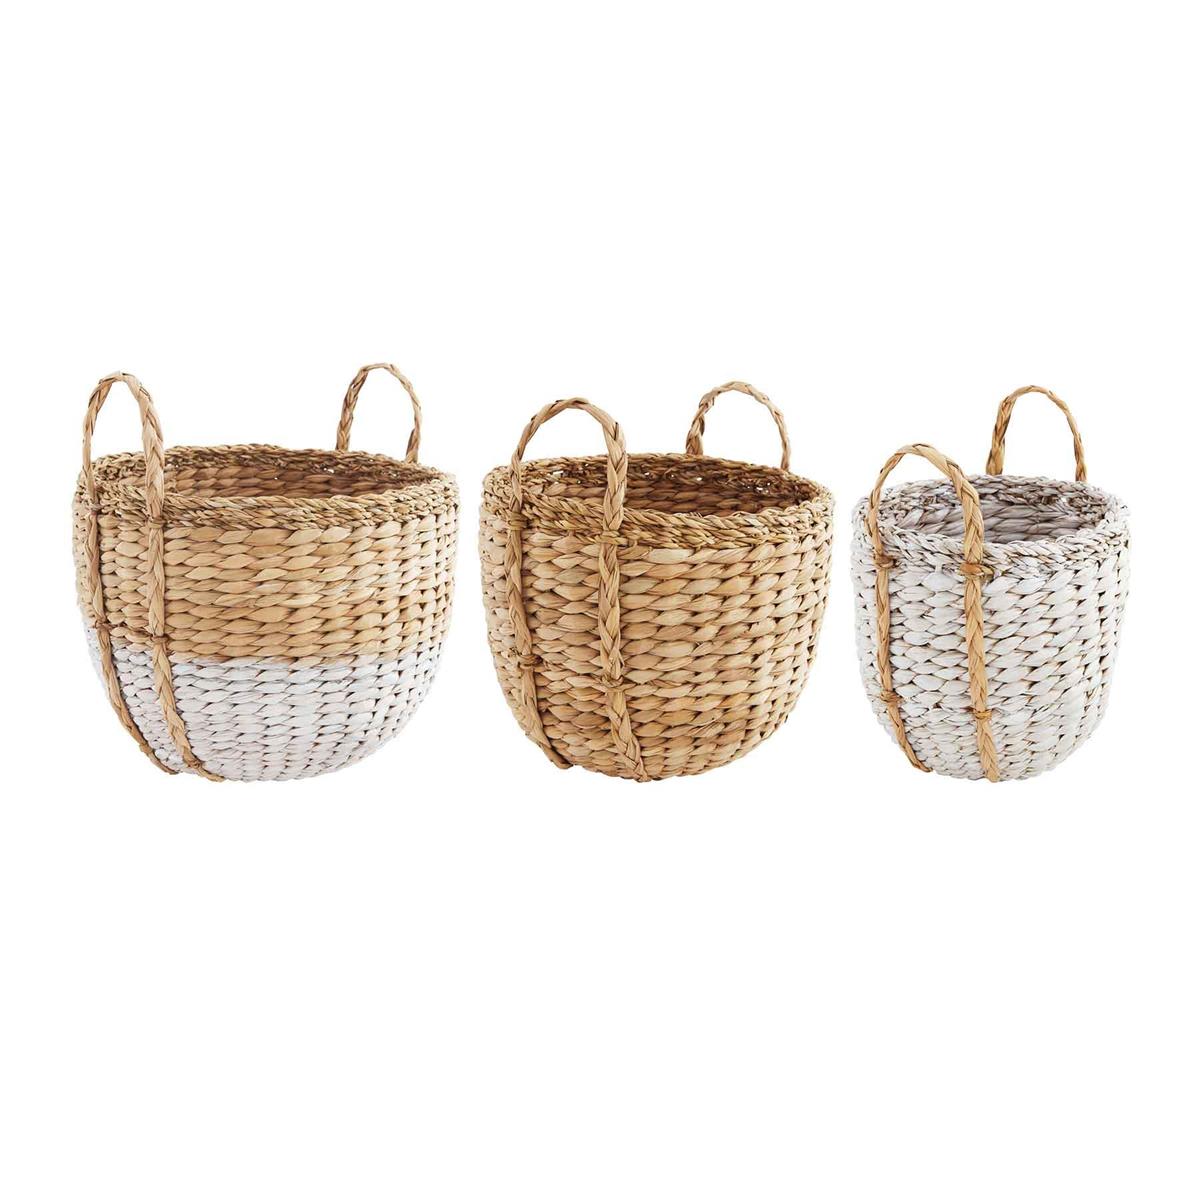 all three sizes of seagrass baskets with handles on a white background